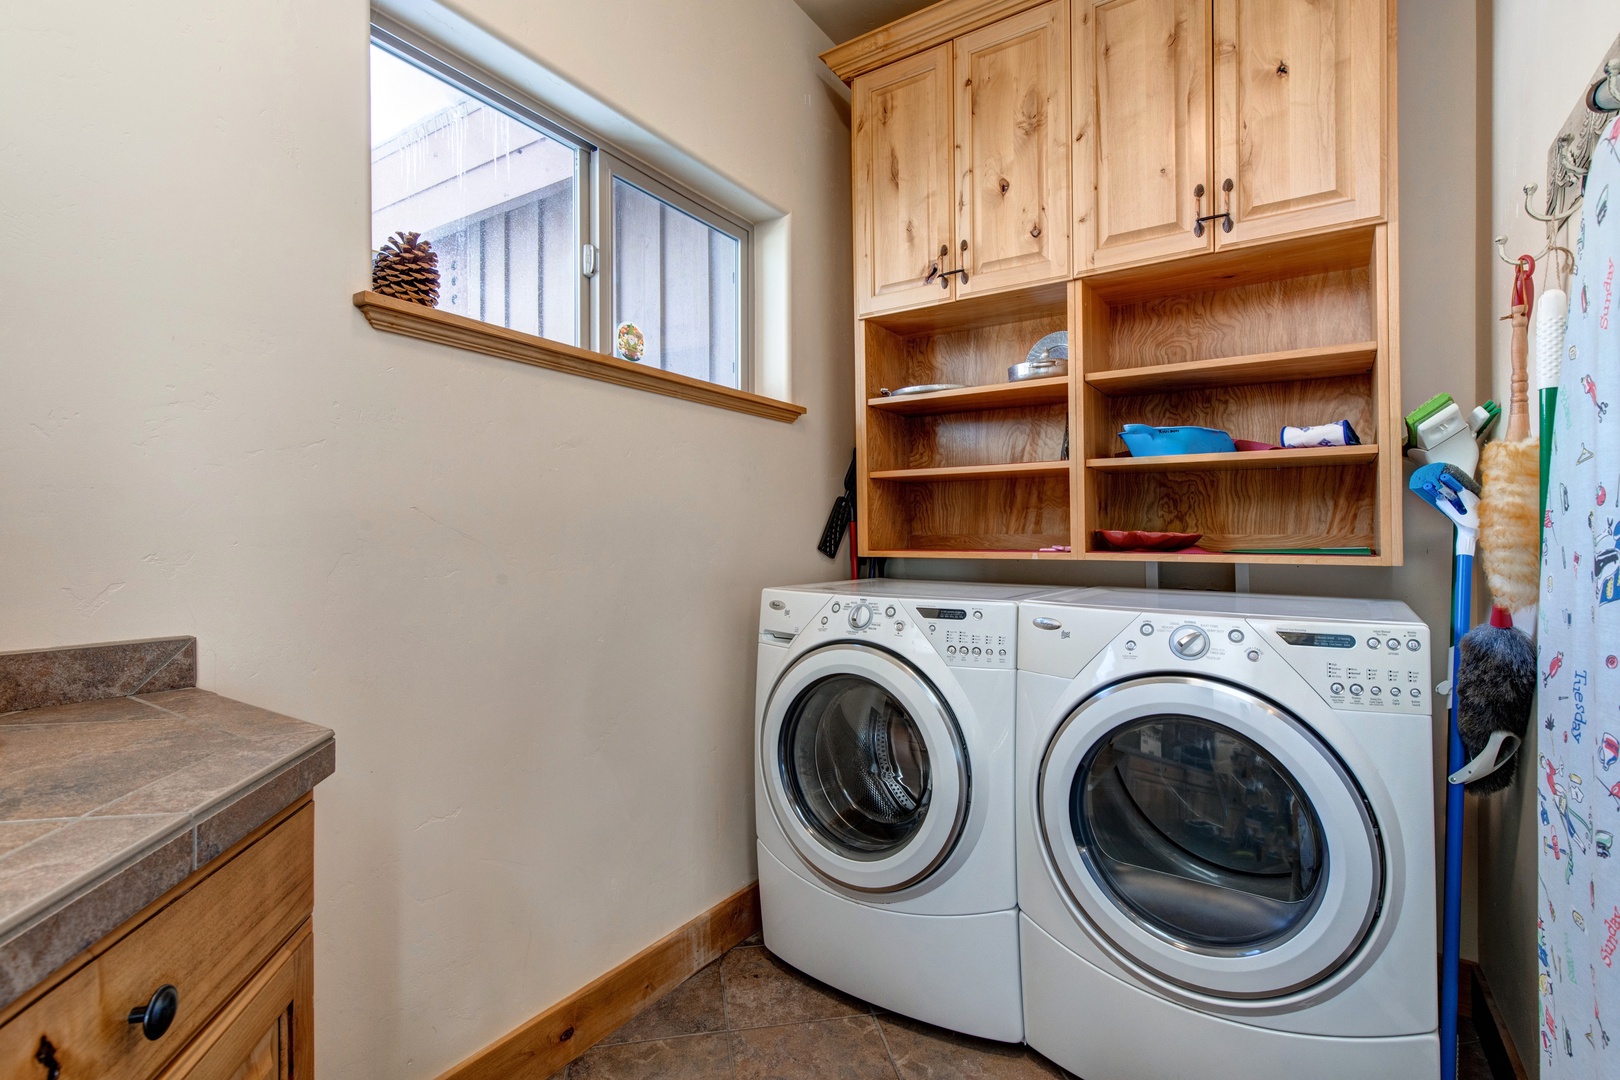 Park City Vacation Rentals, Cedar Ridge Townhouse - Laundry room with washer and dryer